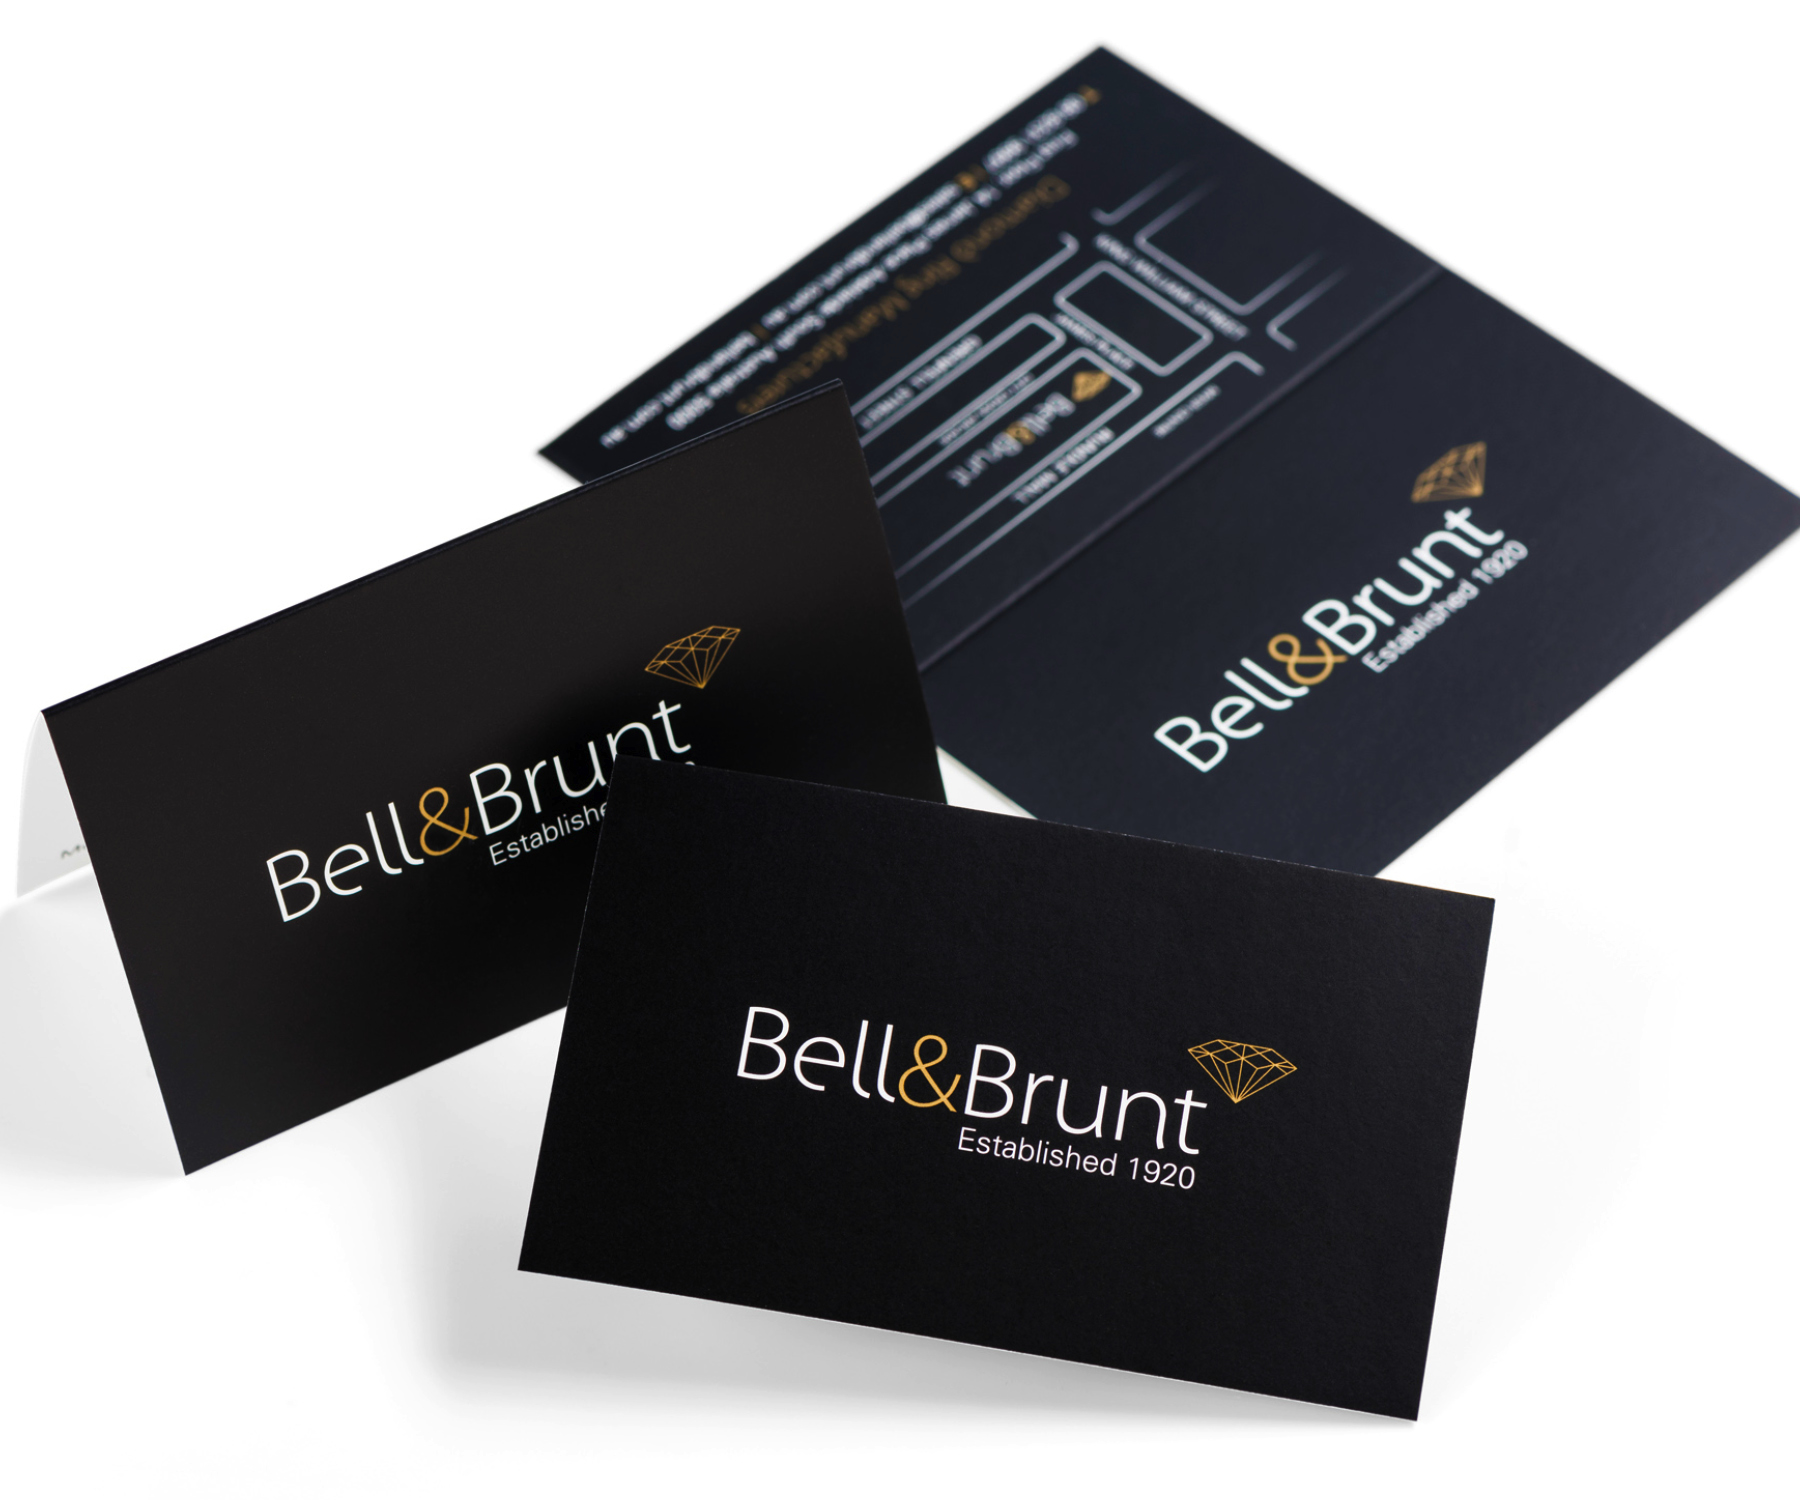 Refreshing a prestige brand.Bell & Brunt is a family-owned manufacturing jeweller that specialises in handcrafted engagement and wedding rings.  With a proud history of almost 100 years in business, Bell & Brunt asked CASTONDESIGN to refresh their brand to better reflect their modern but timeless range of jewellery. Working closely with the family to a tight brief, our brand strategy included redesigning the logo and all visual communication including store signage, corporate stationery, their online presence and advertising.